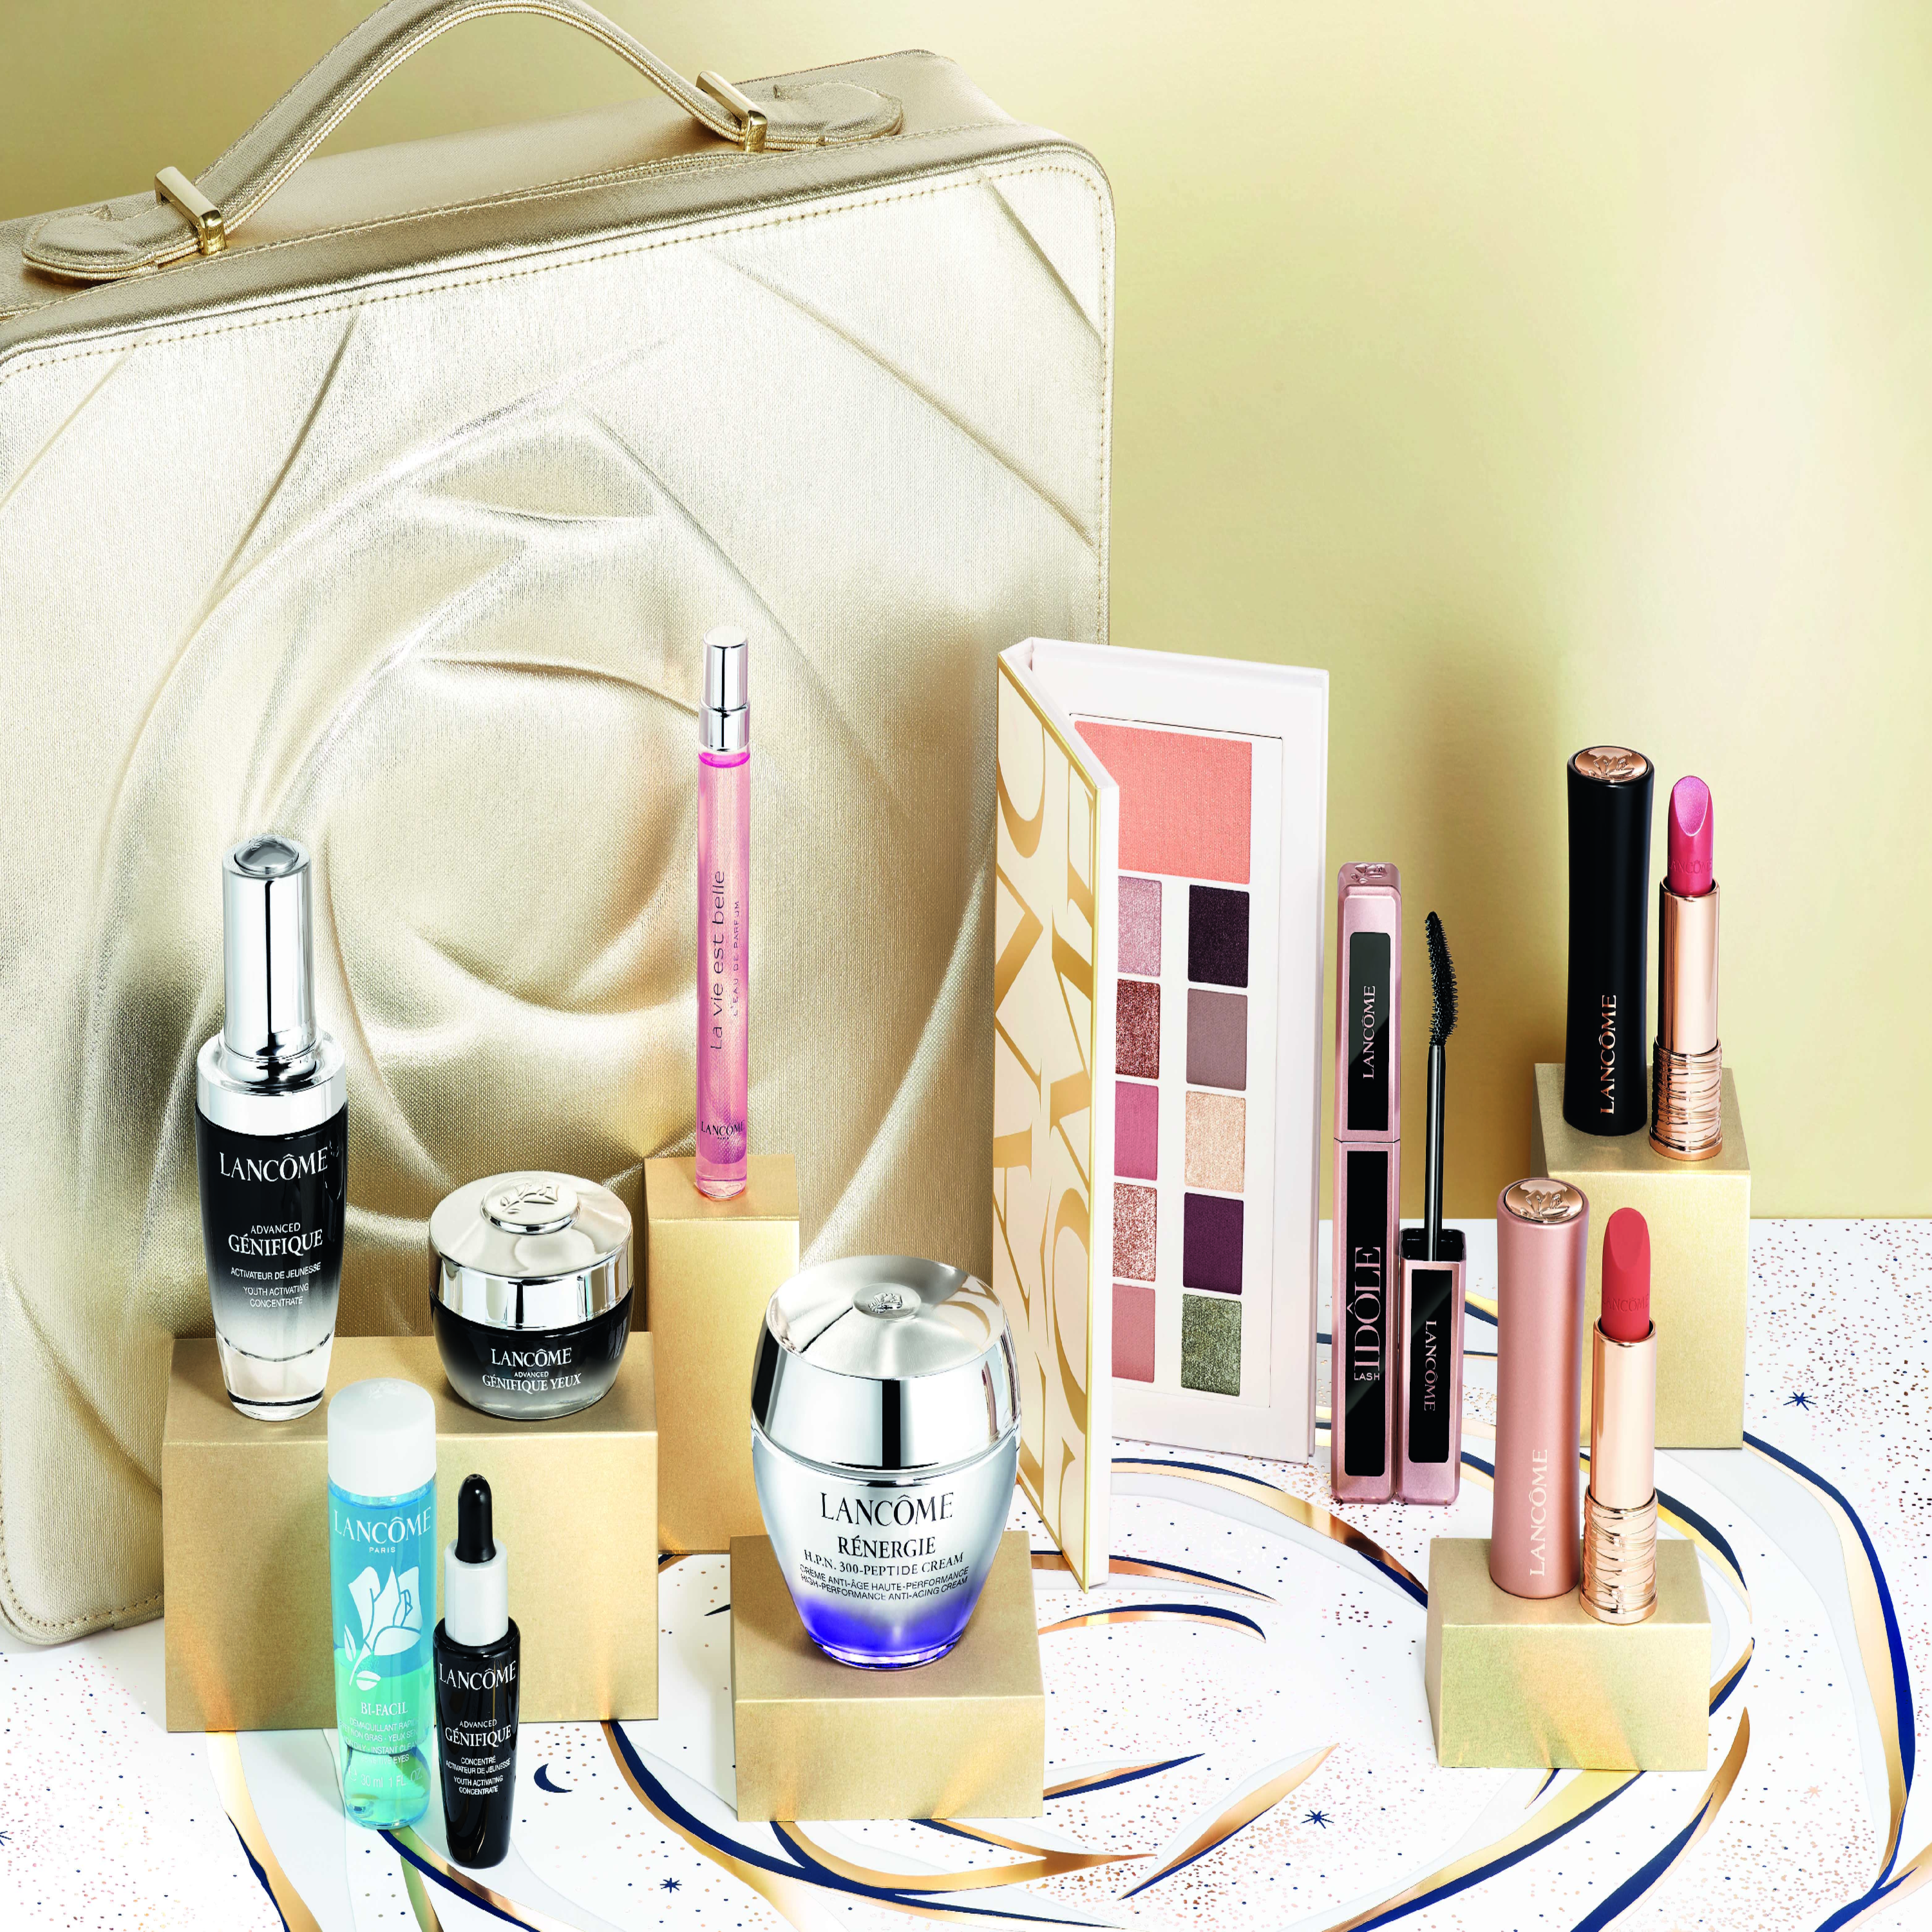 Receive the Blockbuster Gift Set for €90 when you spend €50 across Lancome